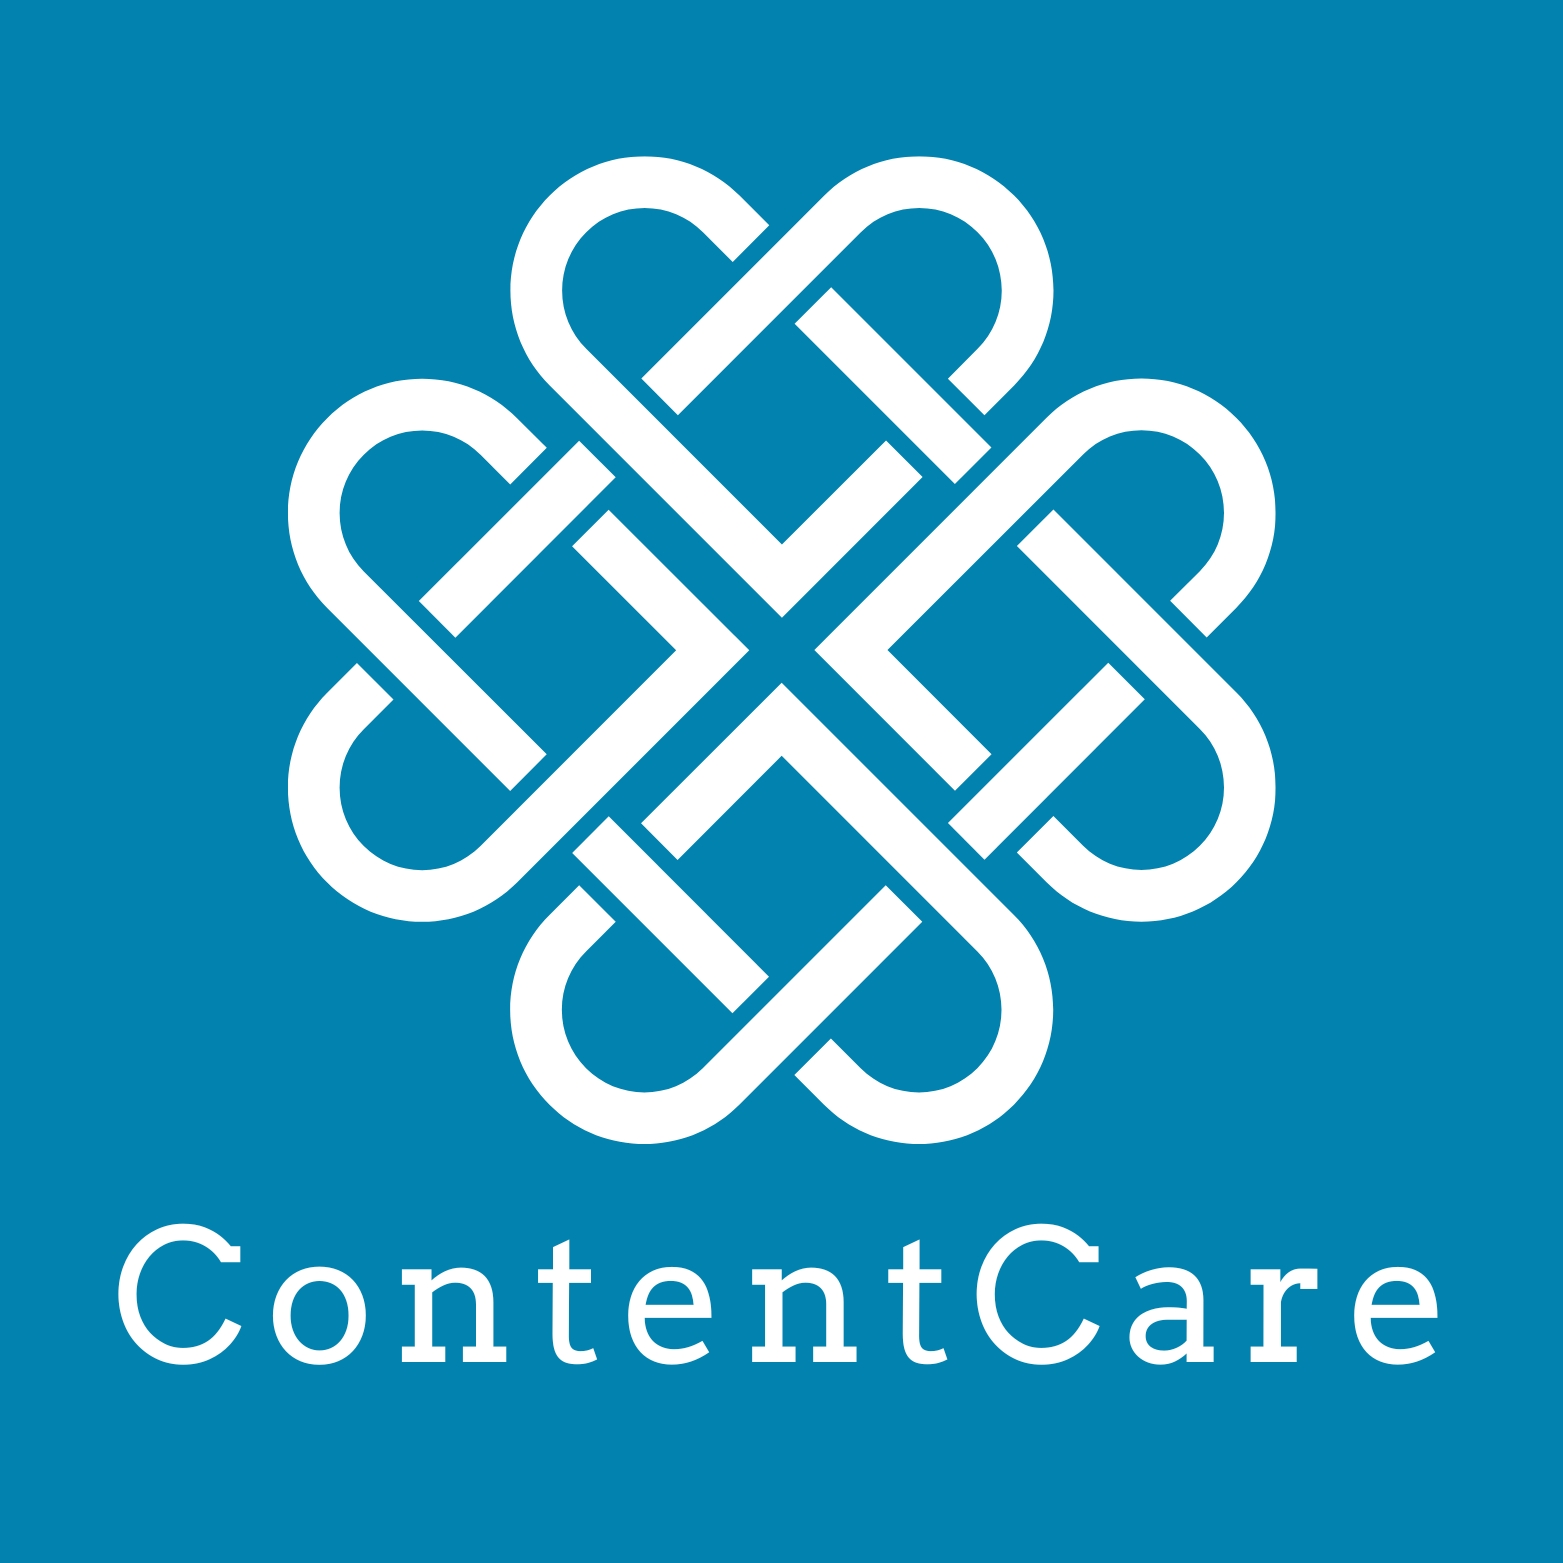 ContentCare Caring for you Content While you Care for Others